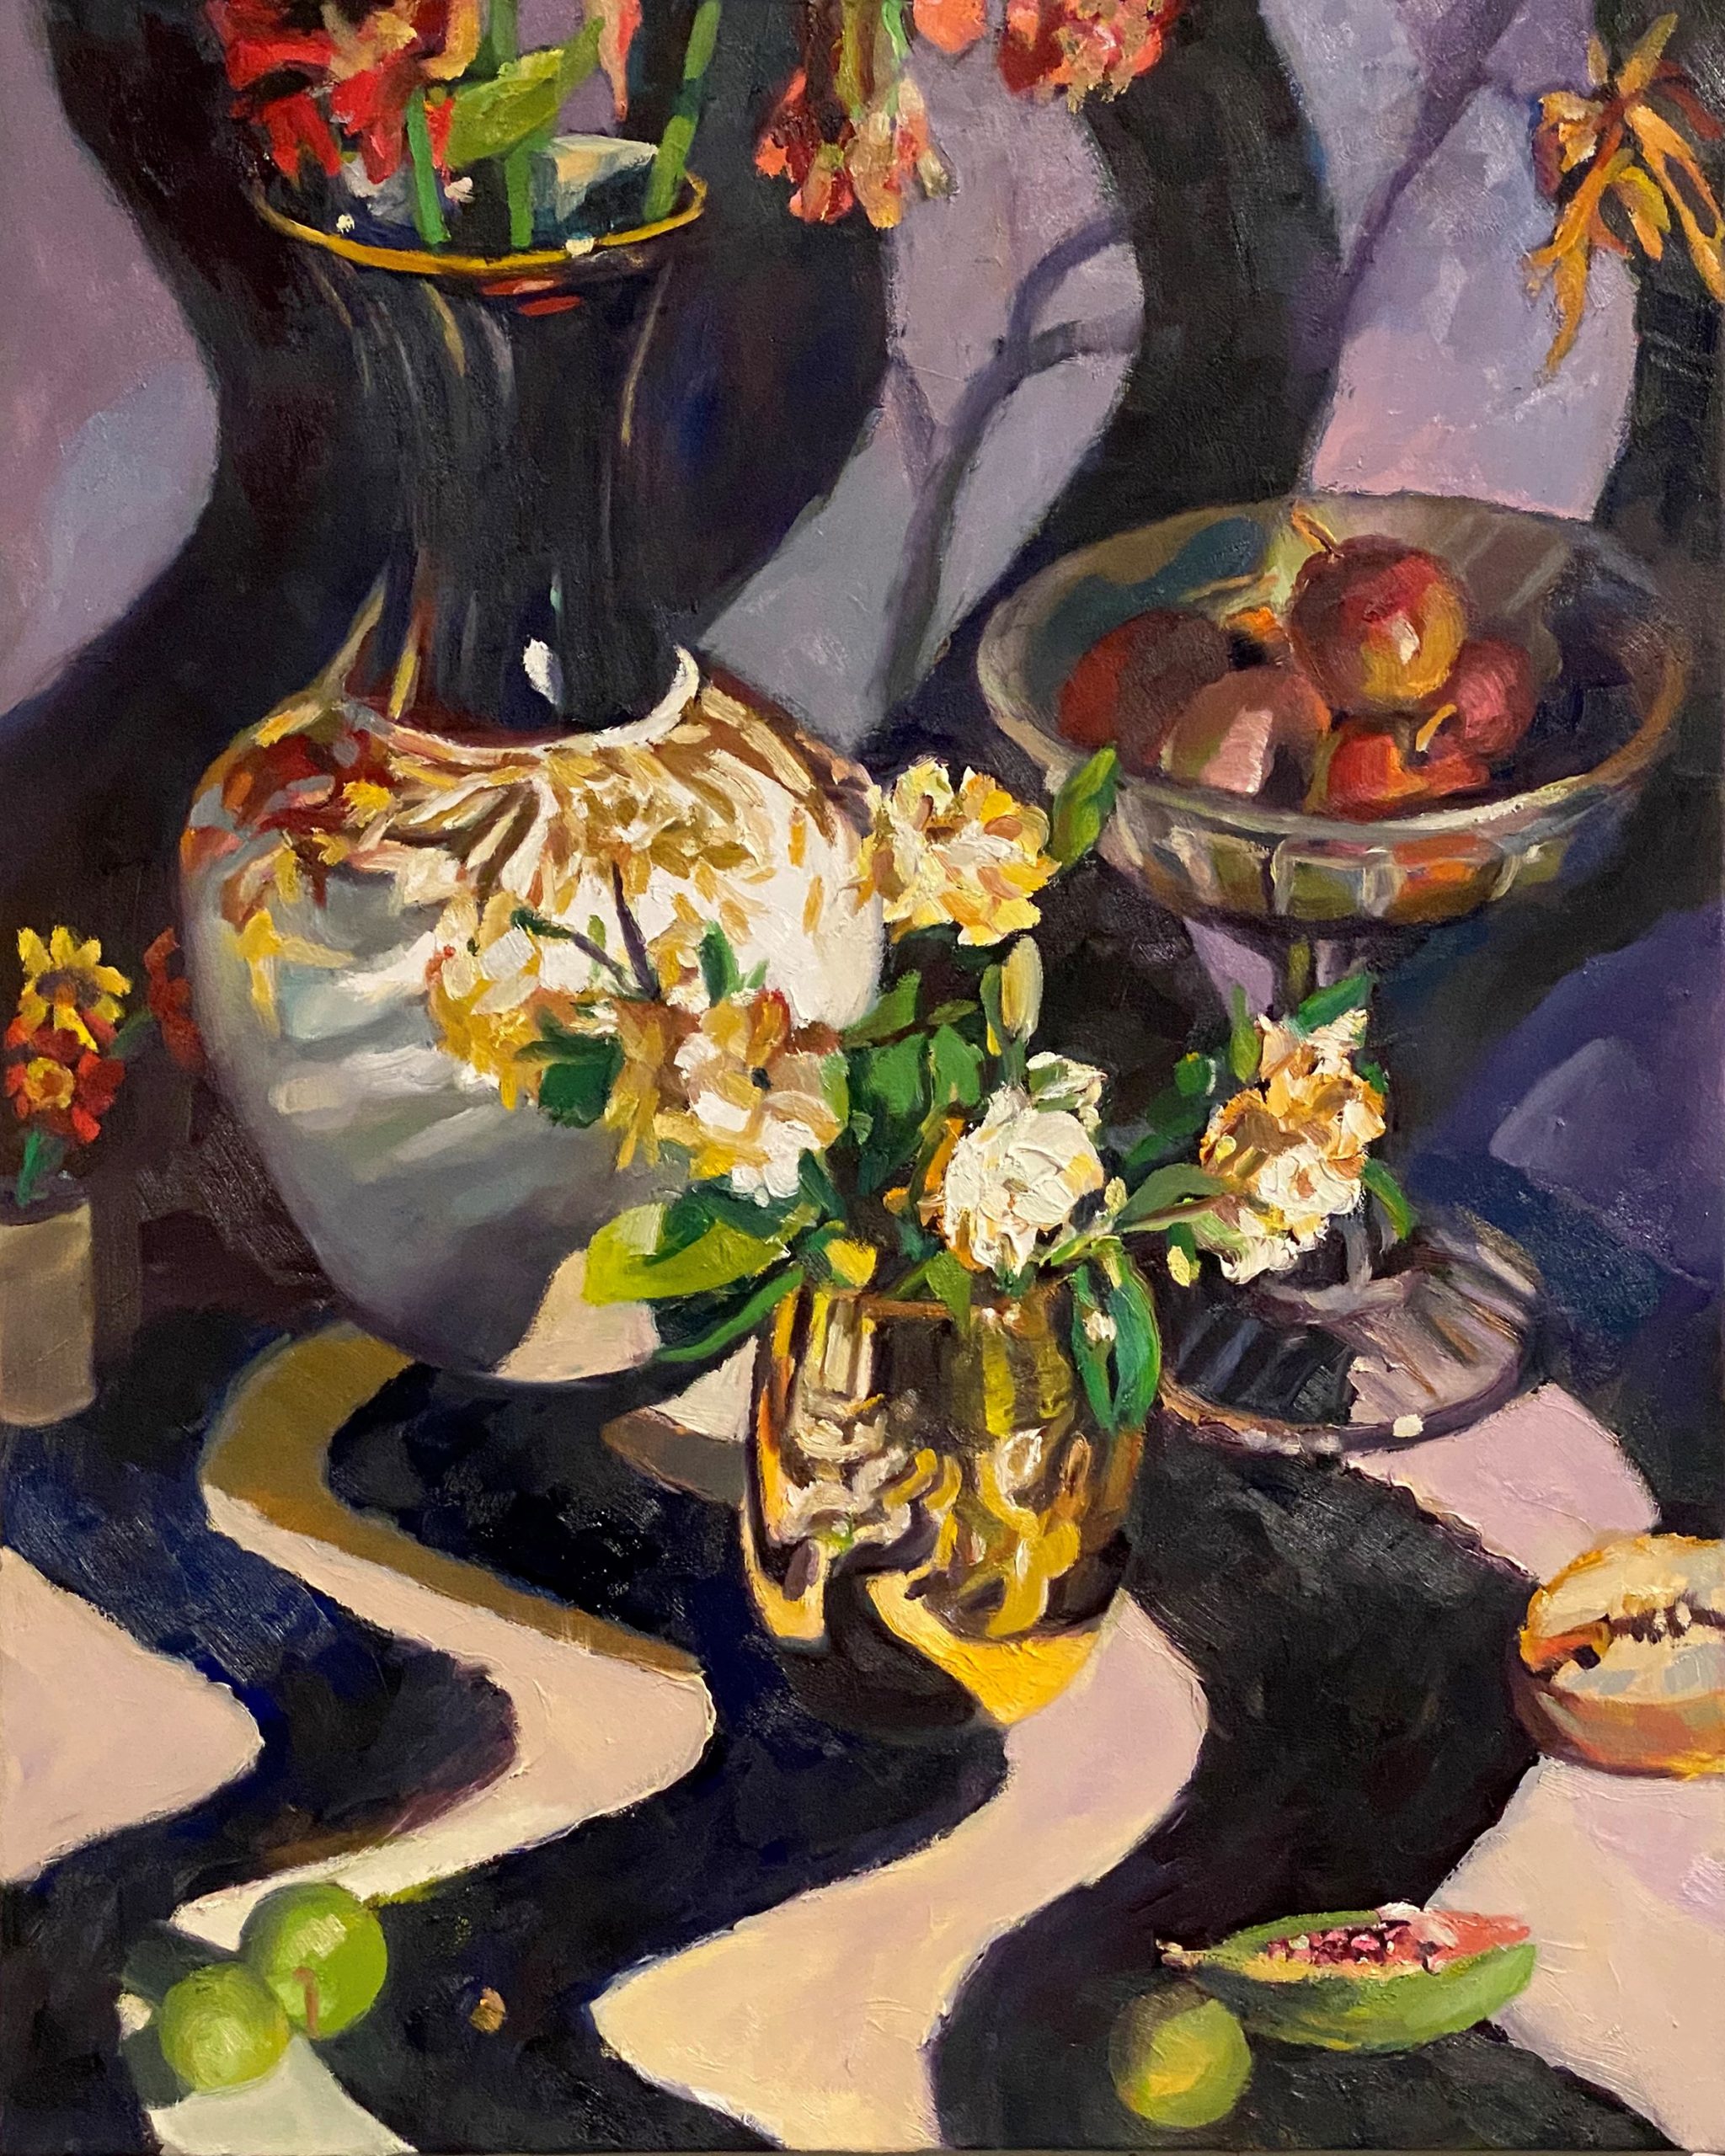 Rosemary Valadon 'Gardenias and Plums' oil on canvas 76 x 61cm $9,600 SOLD